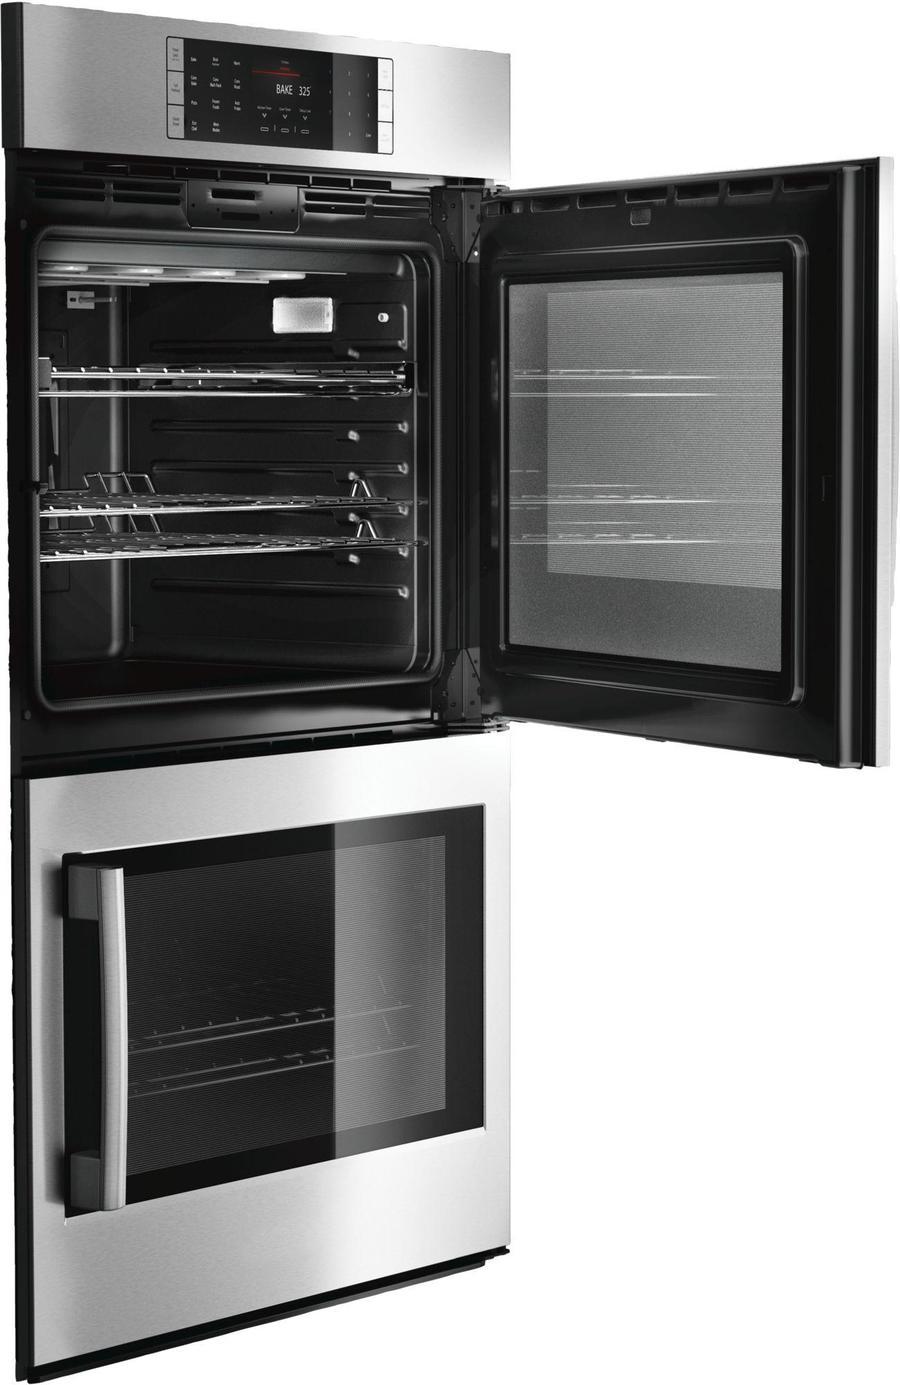 Bosch - 4.6 cu. ft Double Wall Oven in Stainless Steel - HBLP651RUC